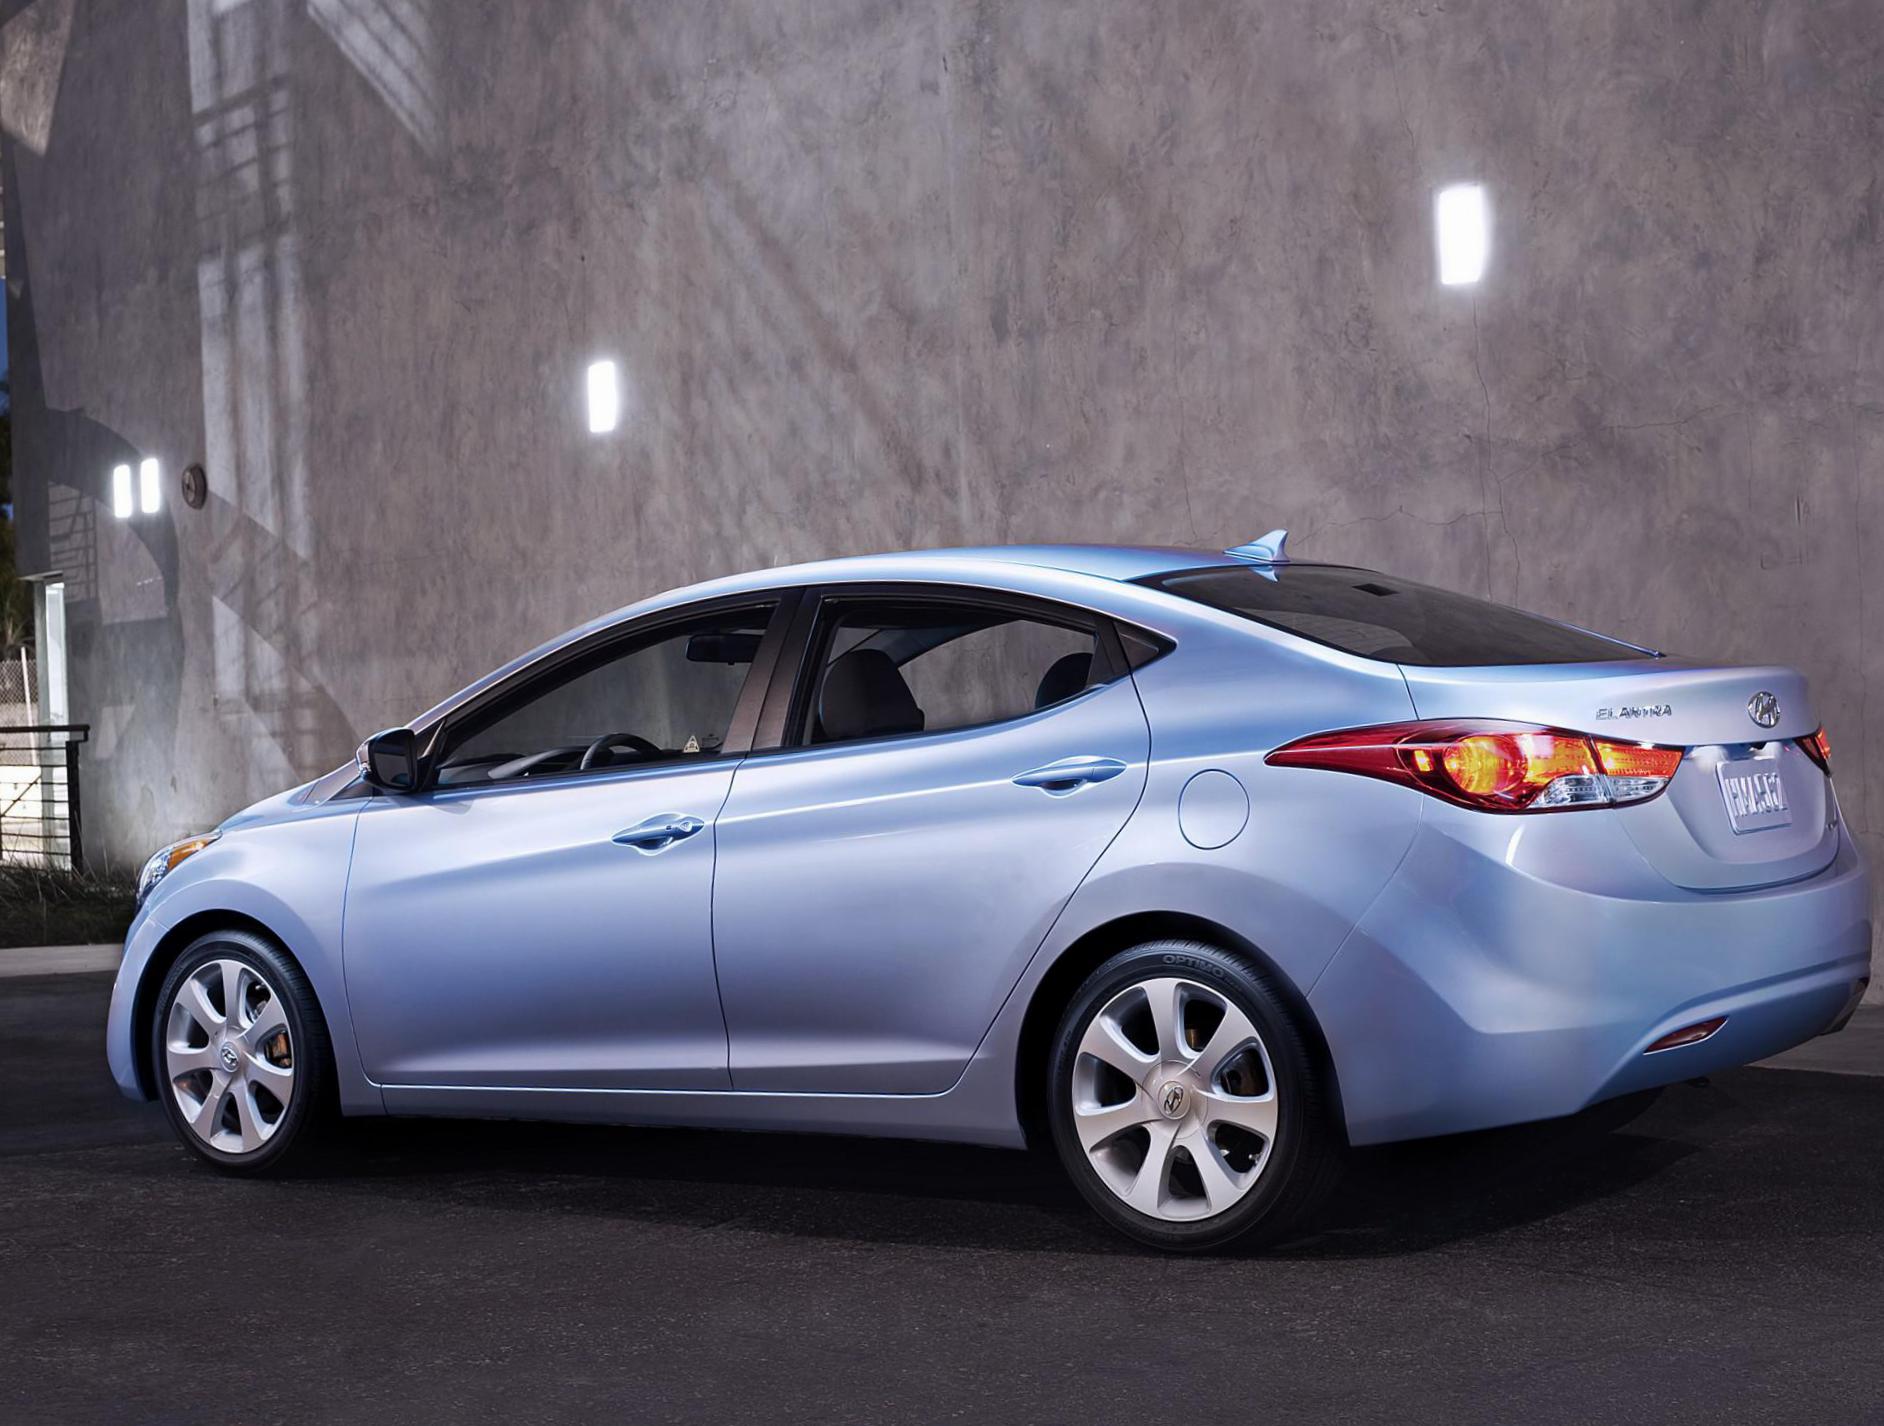 Elantra MD Hyundai approved coupe